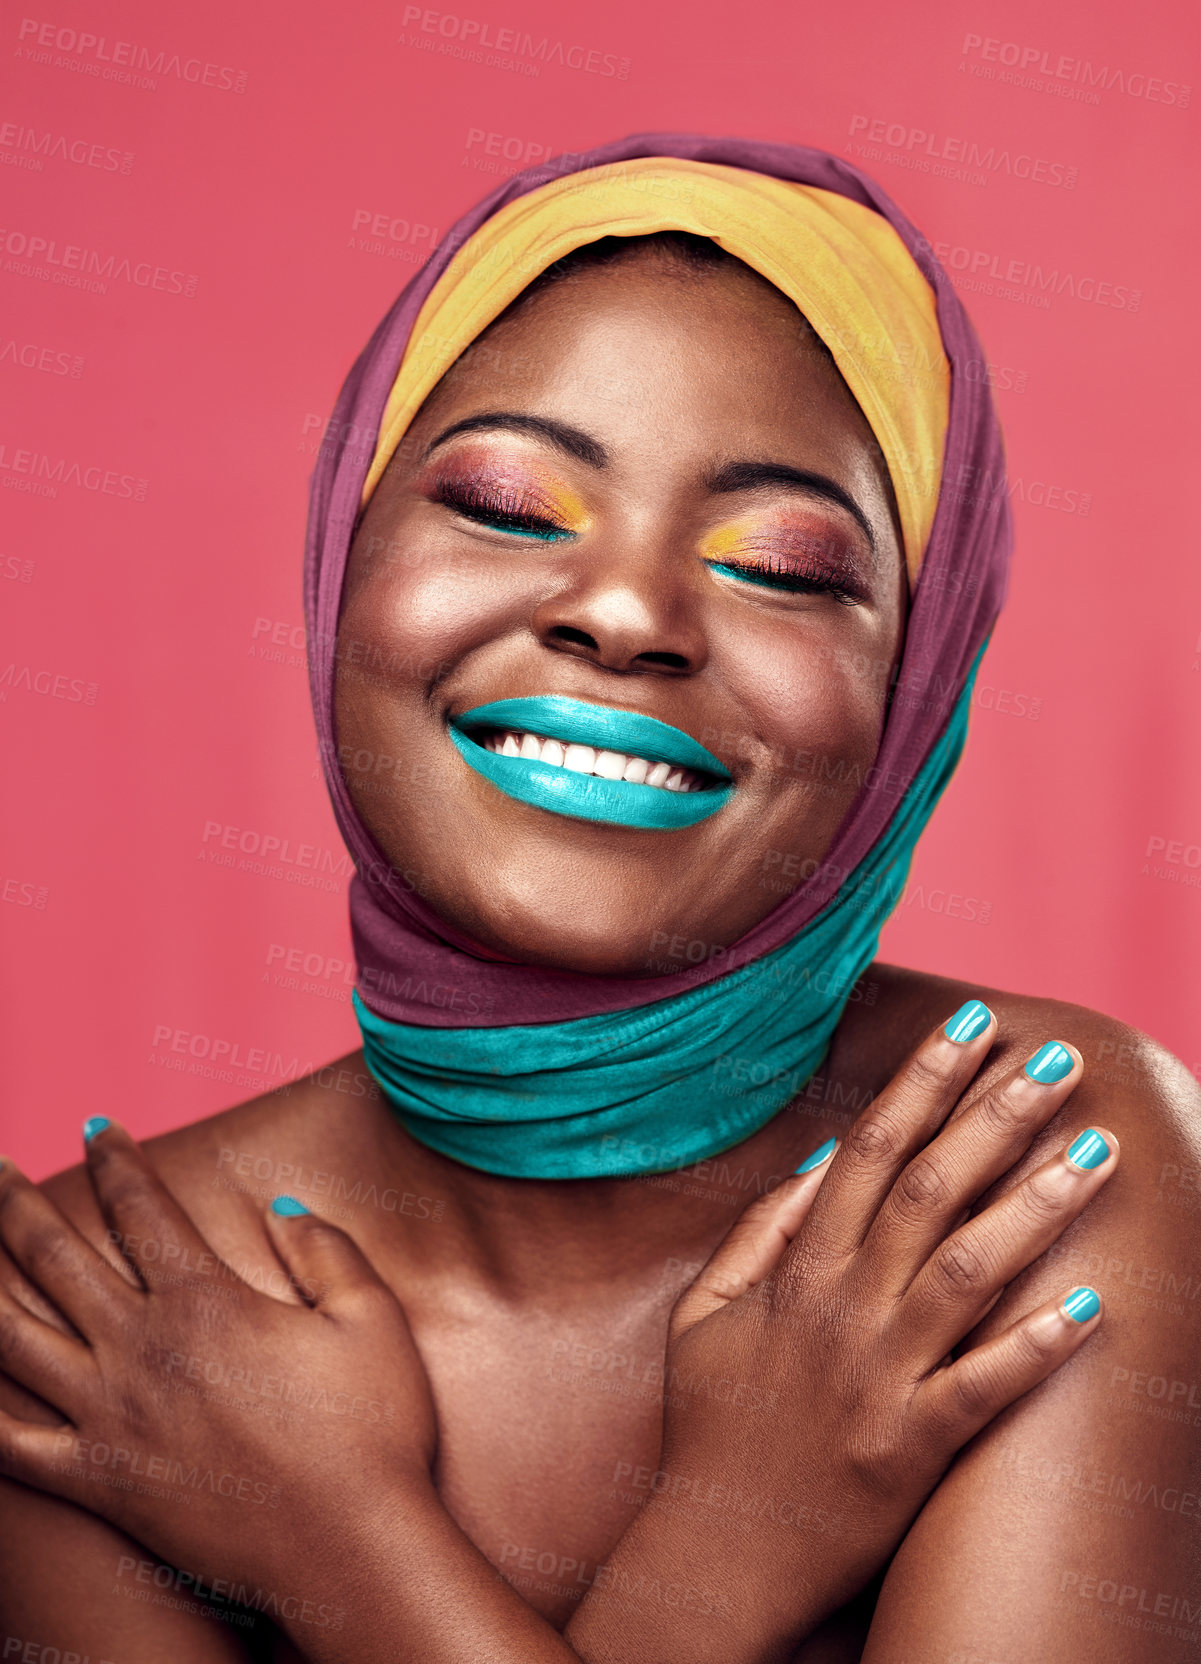 Buy stock photo Studio shot of a beautiful young woman smiling while wearing a head wrap and make up against a pink background